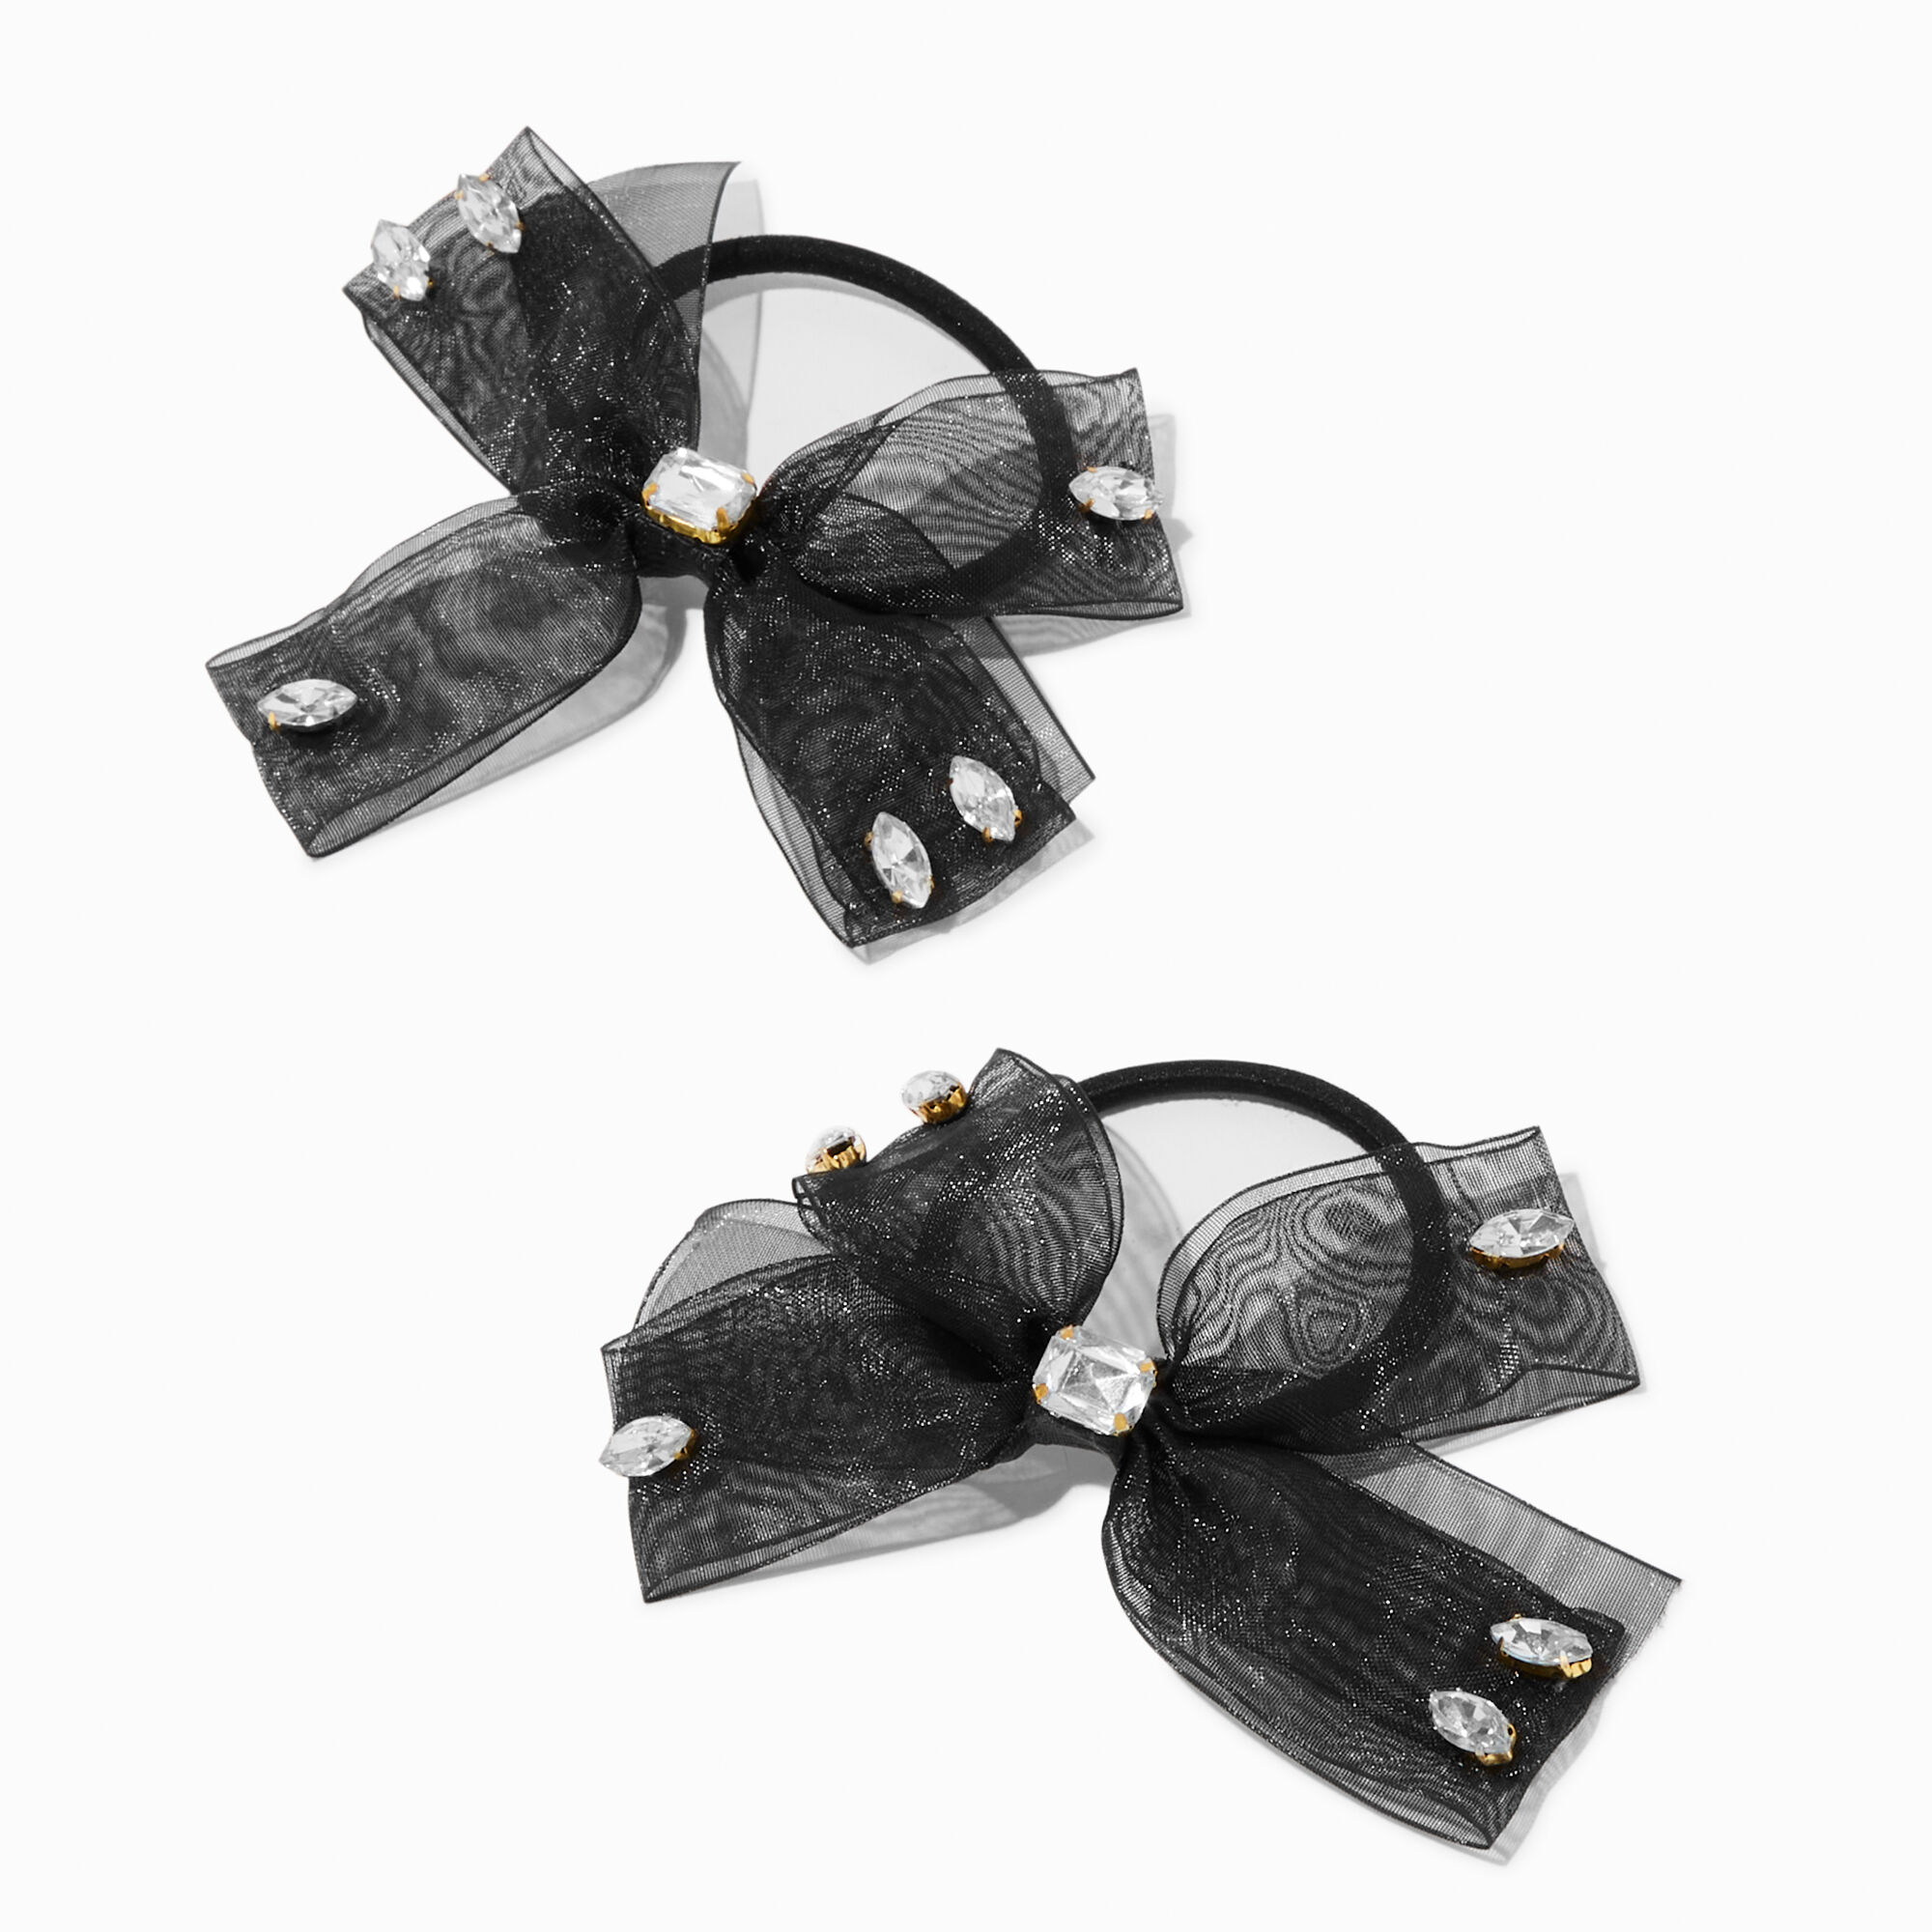 View Claires Crystal Embellished Sheer Bow Hair Ties 2 Pack Black information